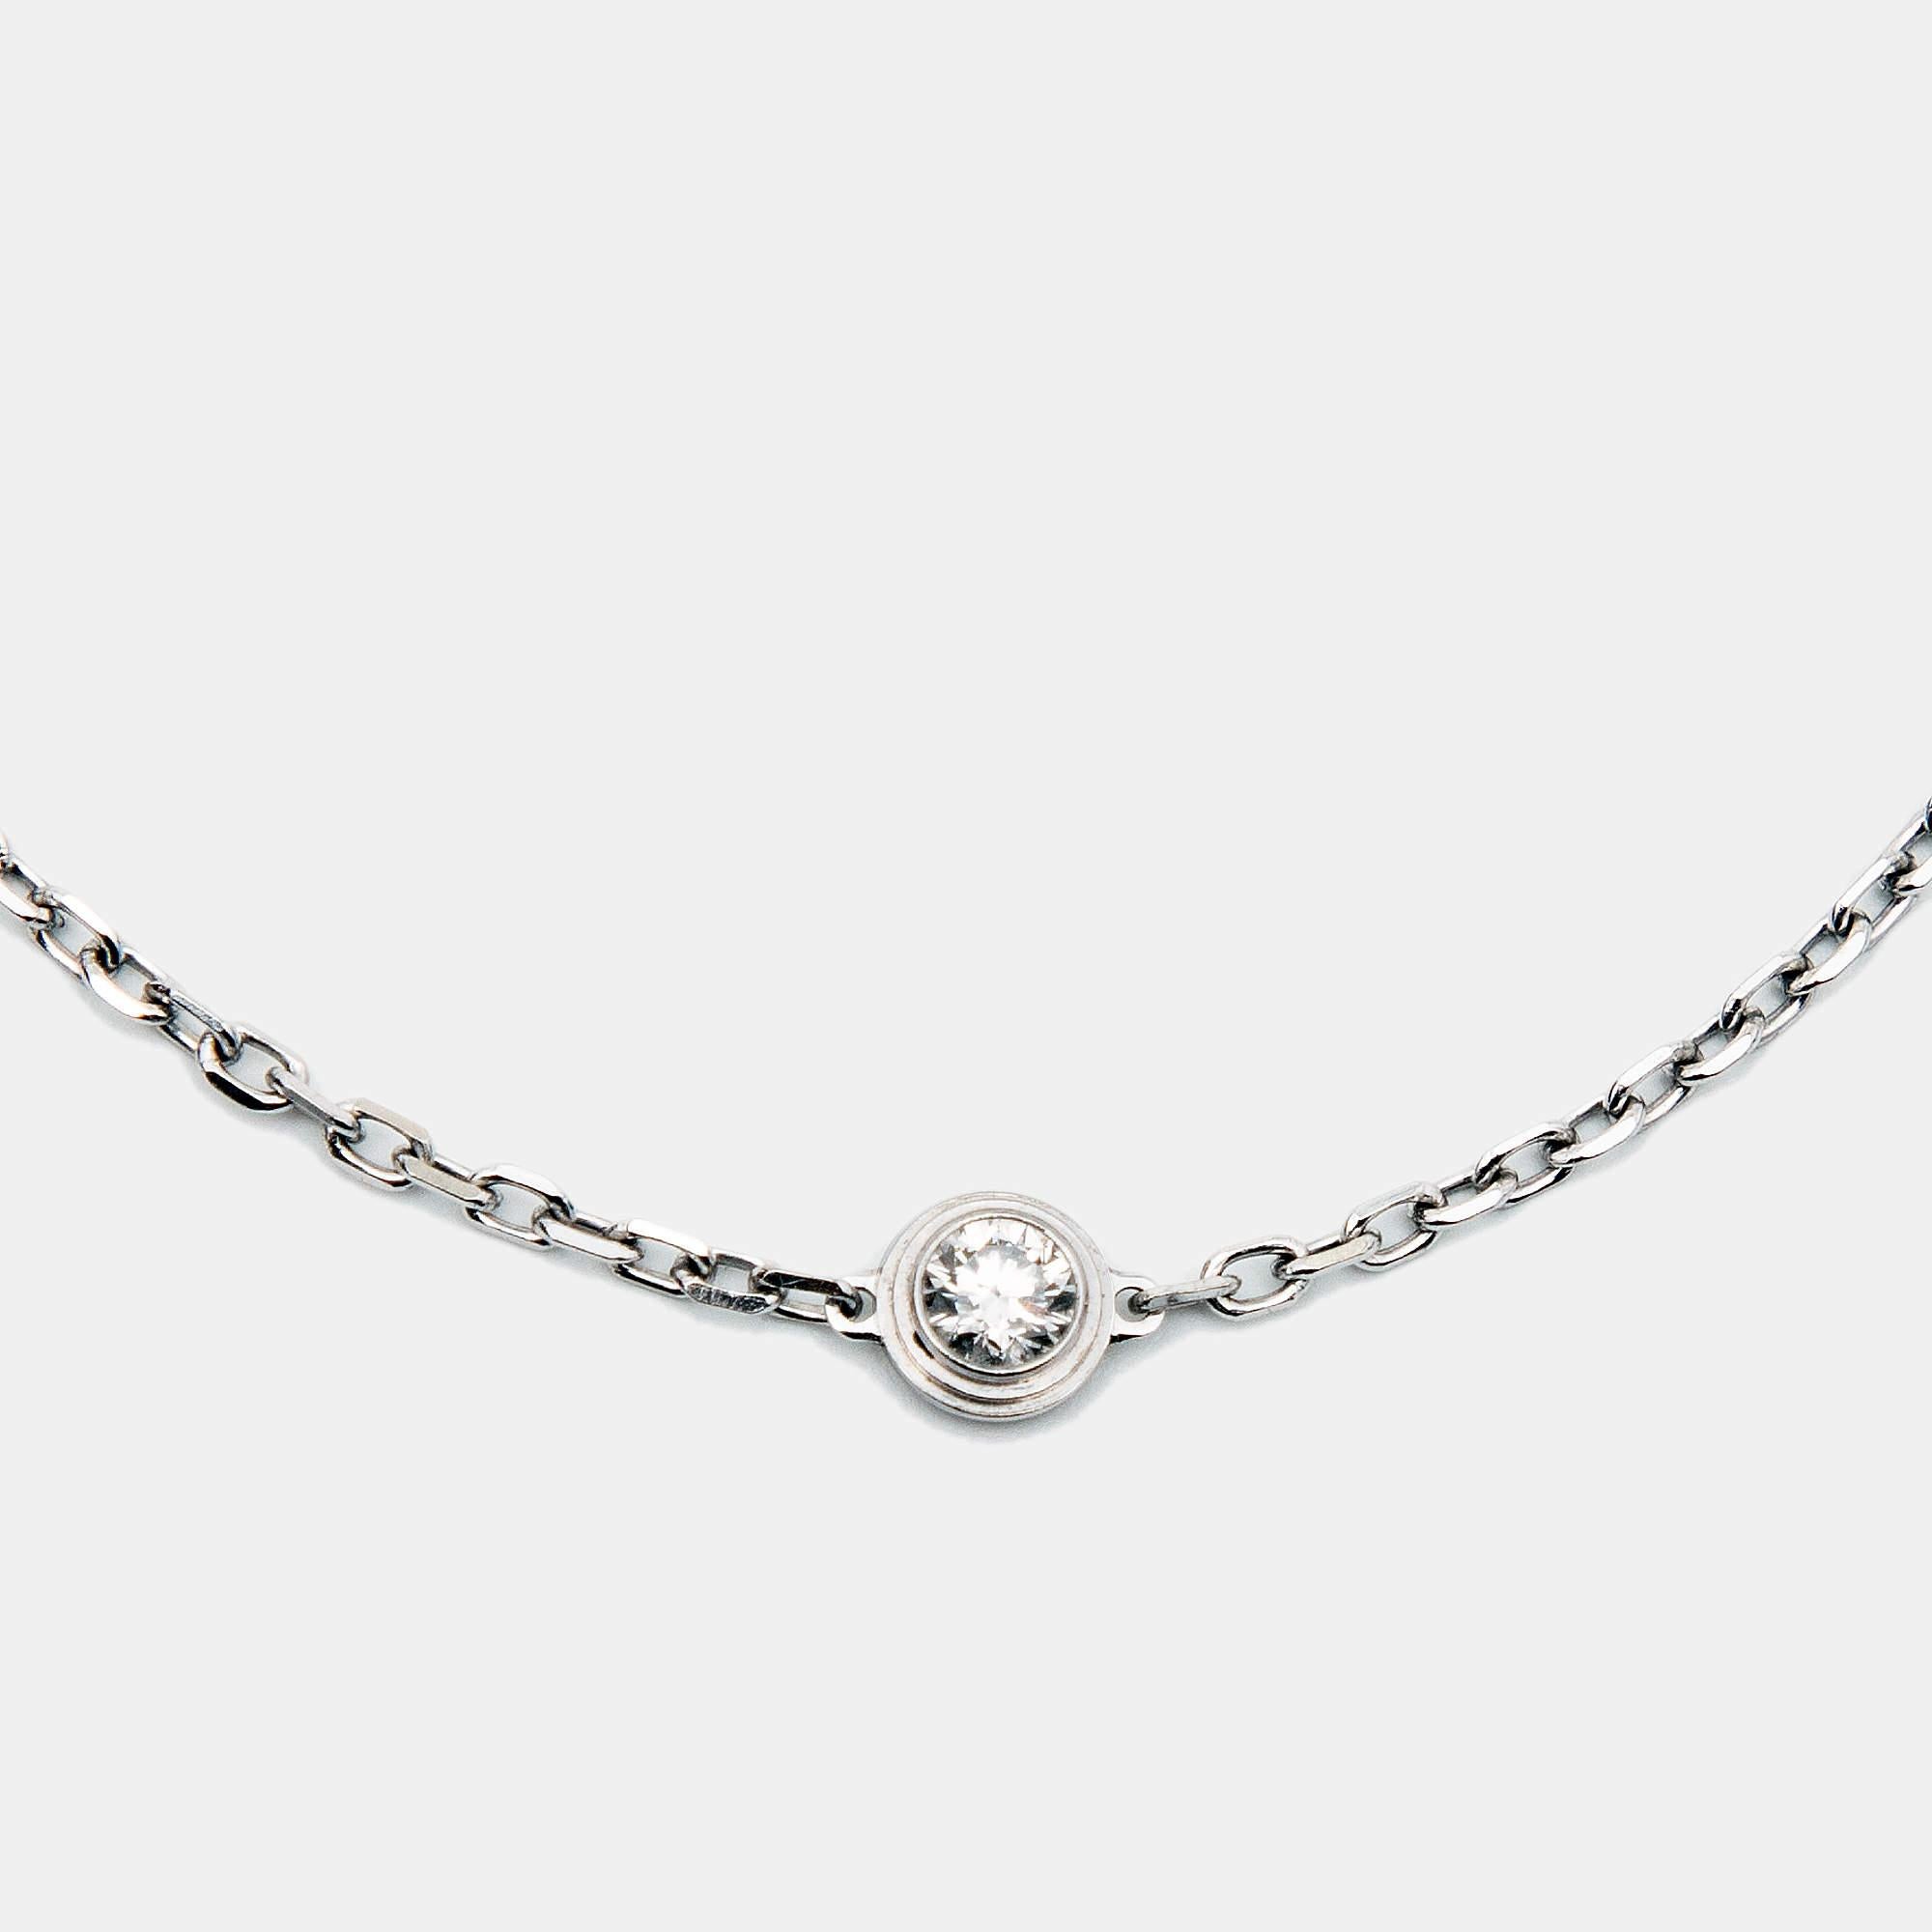 Cartier d'Amour collection has pieces designed with wearability in mind to act as everyday symbols of love. From that exclusive line comes this bracelet fashioned in 18k white gold. The delicate chain is secured by a lobster clasp and highlighted by